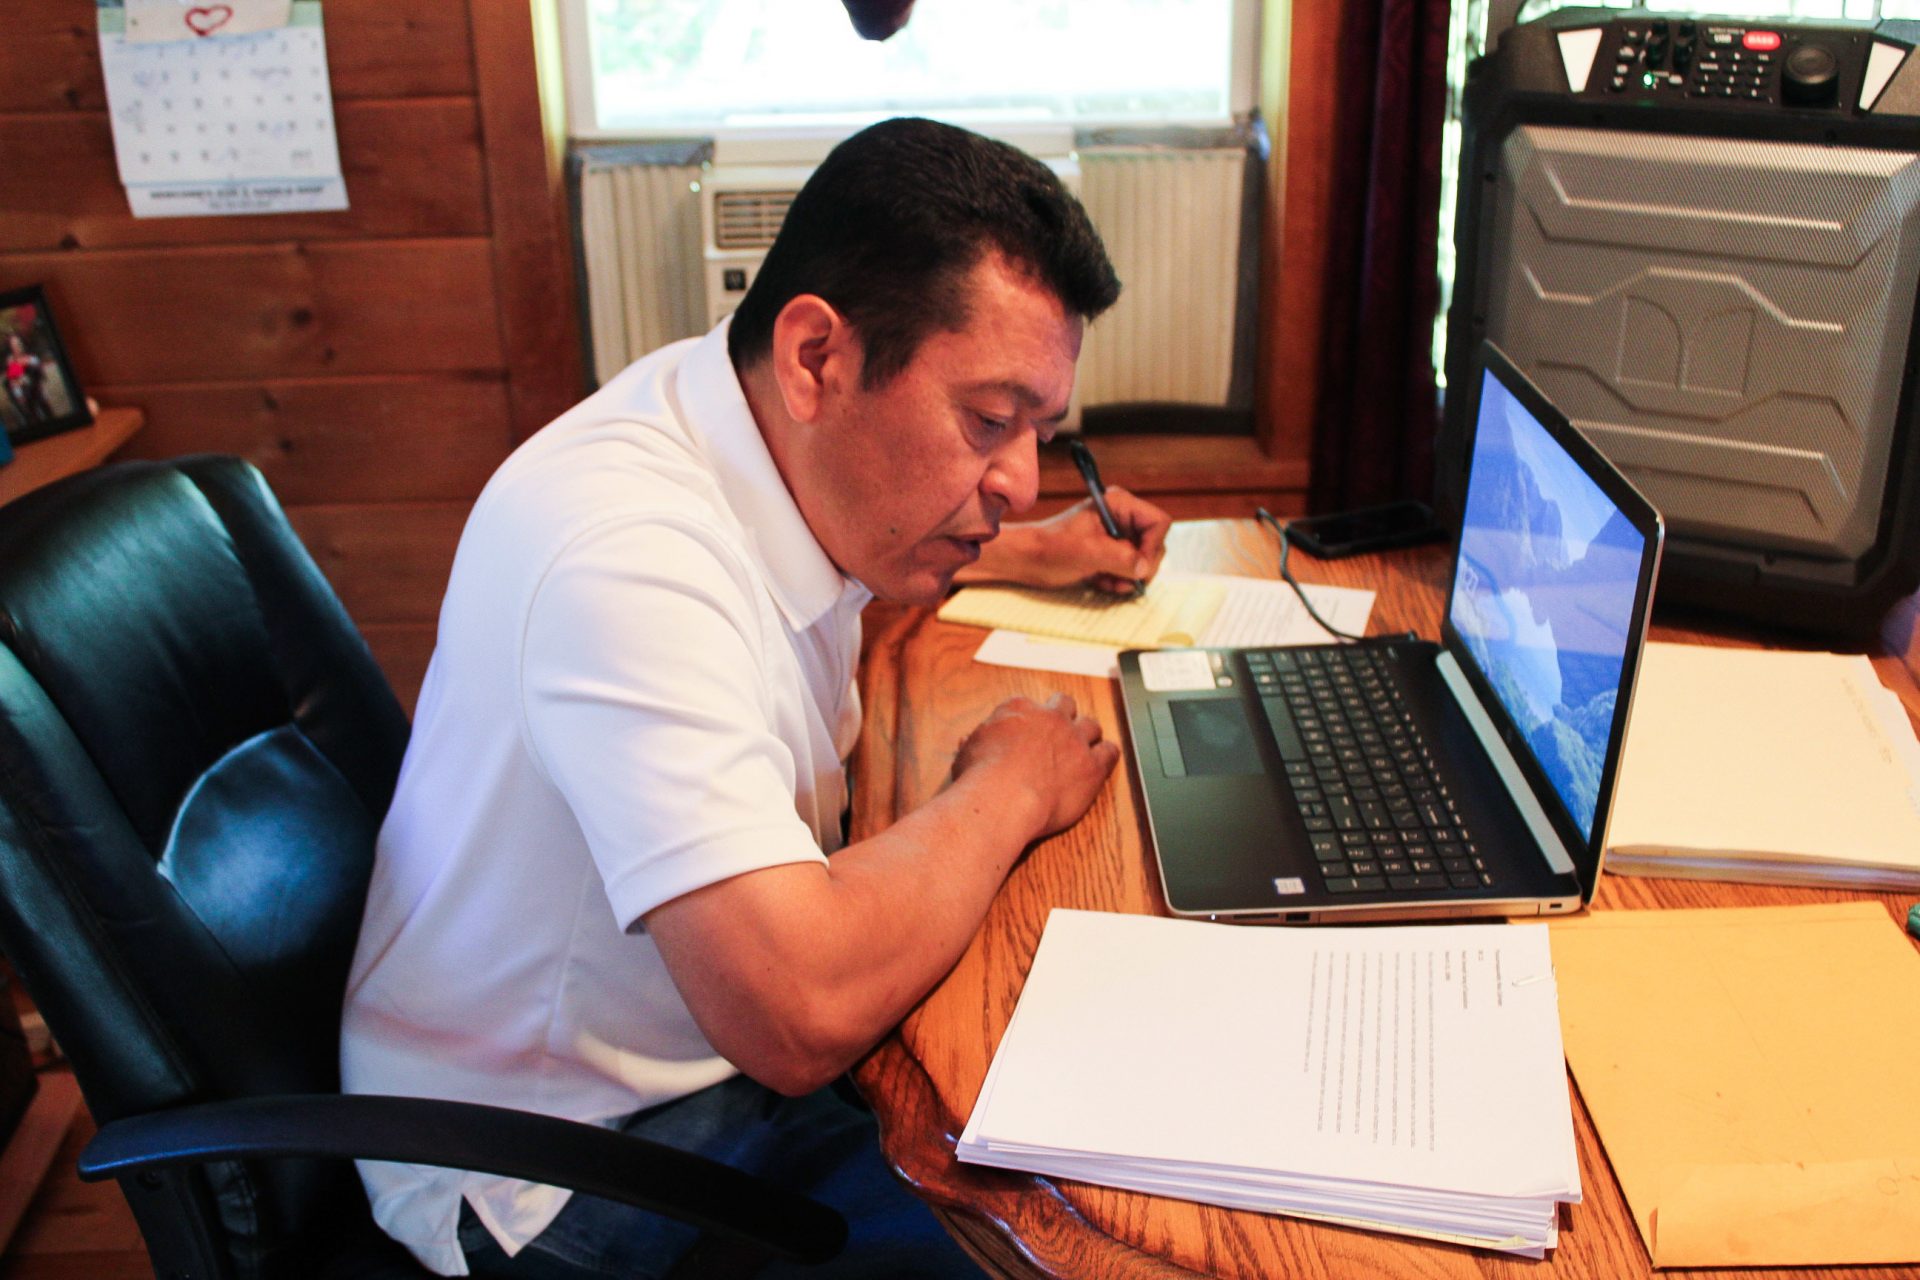 Dwayne Tomah listens to and transcribes an old Passamaquoddy story from a digital copy of a wax cylinder recording. Tomah and others in the Passamaquoddy tribe are translating and interpreting the 129-year-old wax cylinder recordings, which have been digitally restored.